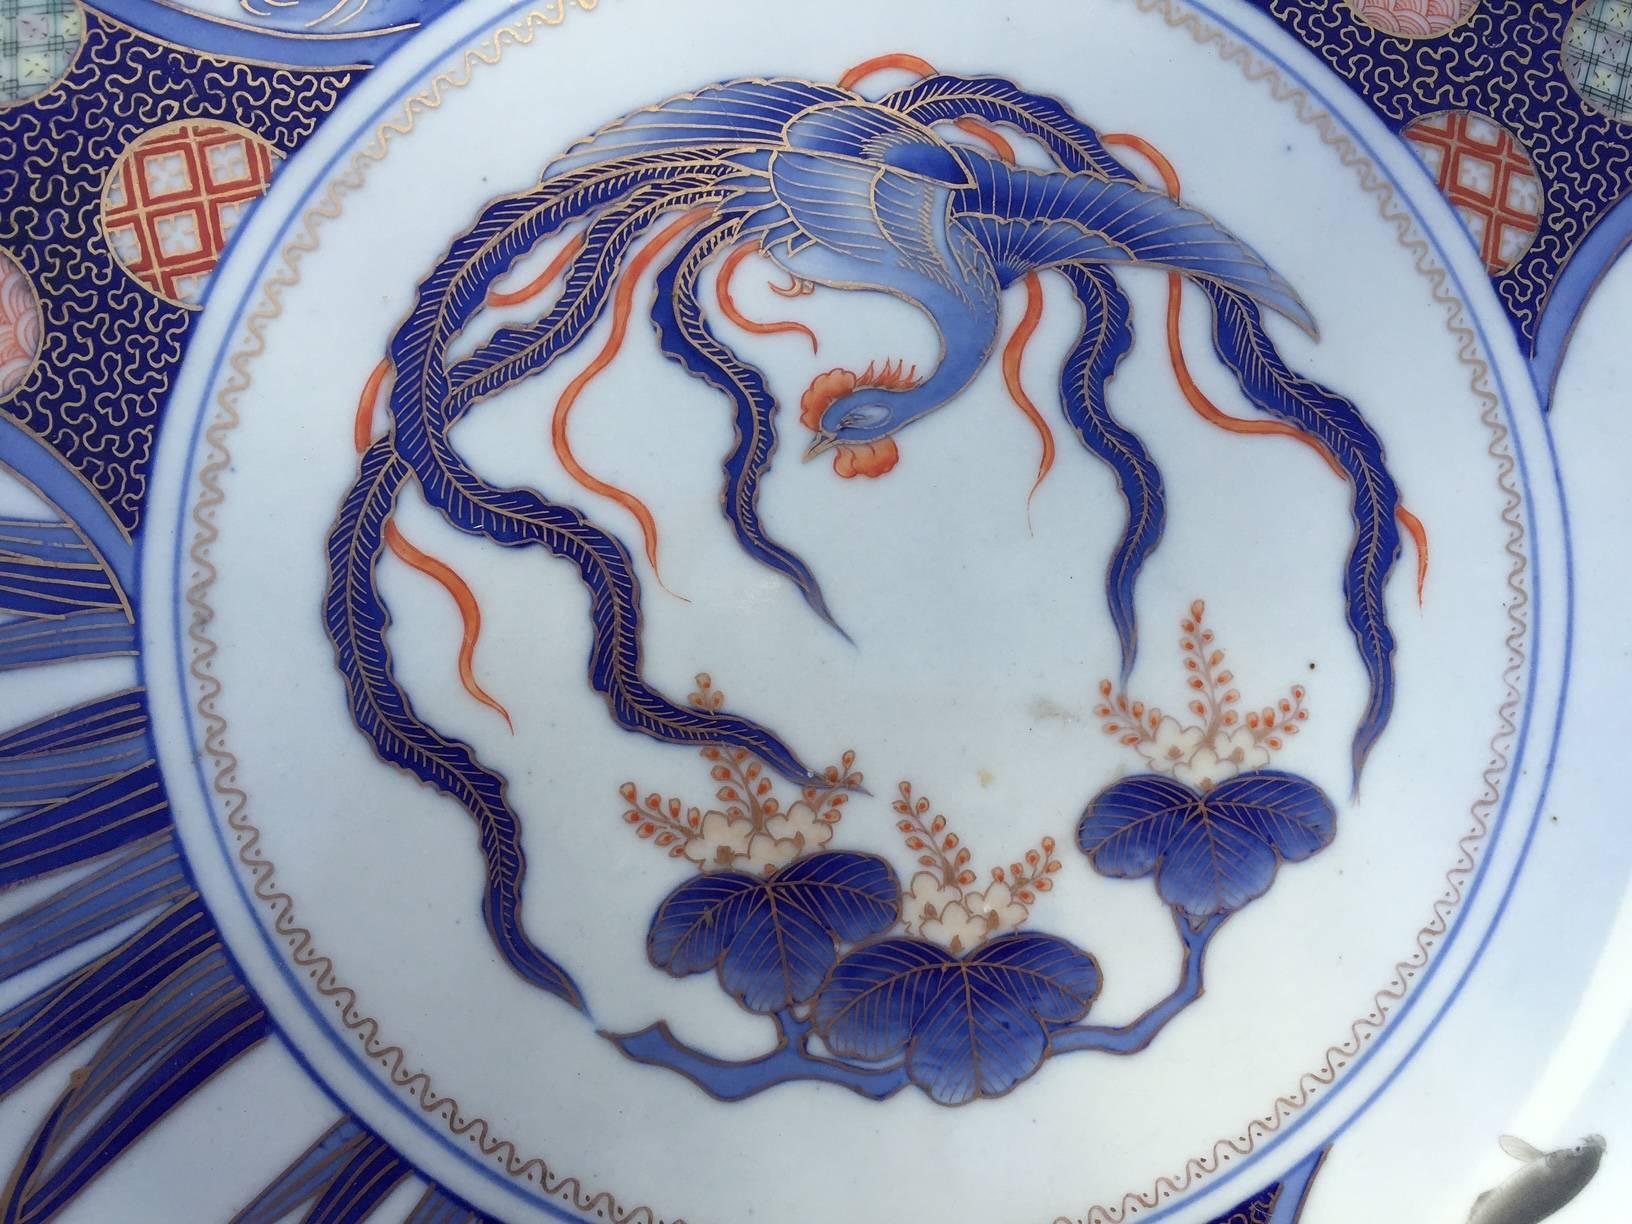 Hand-Painted Japan Beautiful Porcelain Charger, in lovely blue, red, and gold colors, 19c